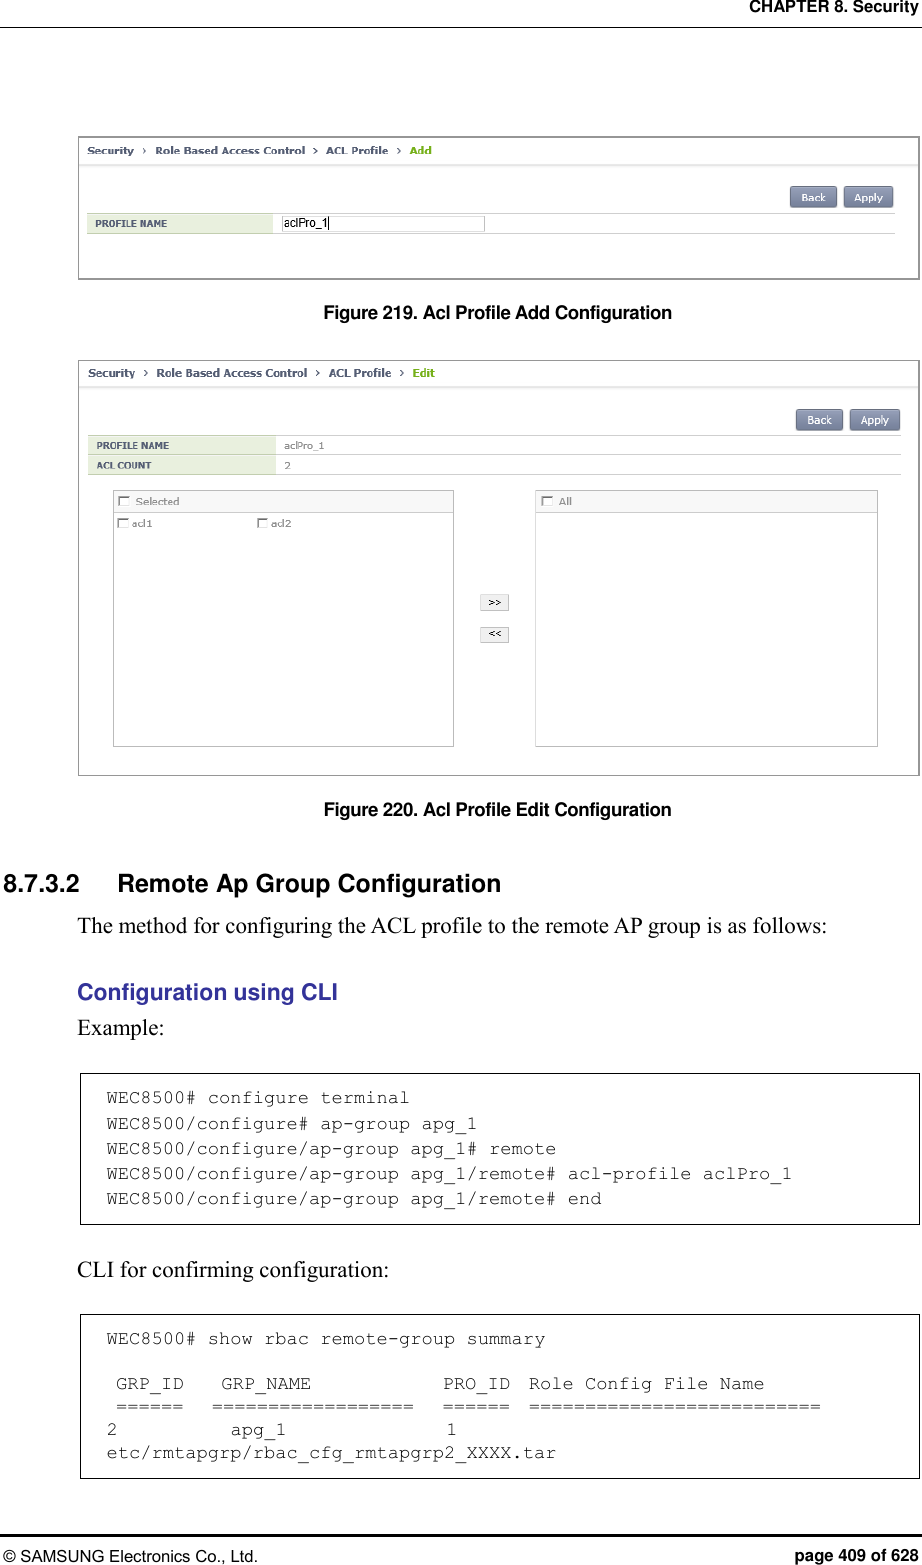 CHAPTER 8. Security © SAMSUNG Electronics Co., Ltd.  page 409 of 628  Figure 219. Acl Profile Add Configuration  Figure 220. Acl Profile Edit Configuration  8.7.3.2  Remote Ap Group Configuration The method for configuring the ACL profile to the remote AP group is as follows:  Configuration using CLI Example:  WEC8500# configure terminal WEC8500/configure# ap-group apg_1 WEC8500/configure/ap-group apg_1# remote WEC8500/configure/ap-group apg_1/remote# acl-profile aclPro_1 WEC8500/configure/ap-group apg_1/remote# end  CLI for confirming configuration:  WEC8500# show rbac remote-group summary   GRP_ID    GRP_NAME              PRO_ID  Role Config File Name  ======   ==================   ======  ========================== 2            apg_1                 1     etc/rmtapgrp/rbac_cfg_rmtapgrp2_XXXX.tar 